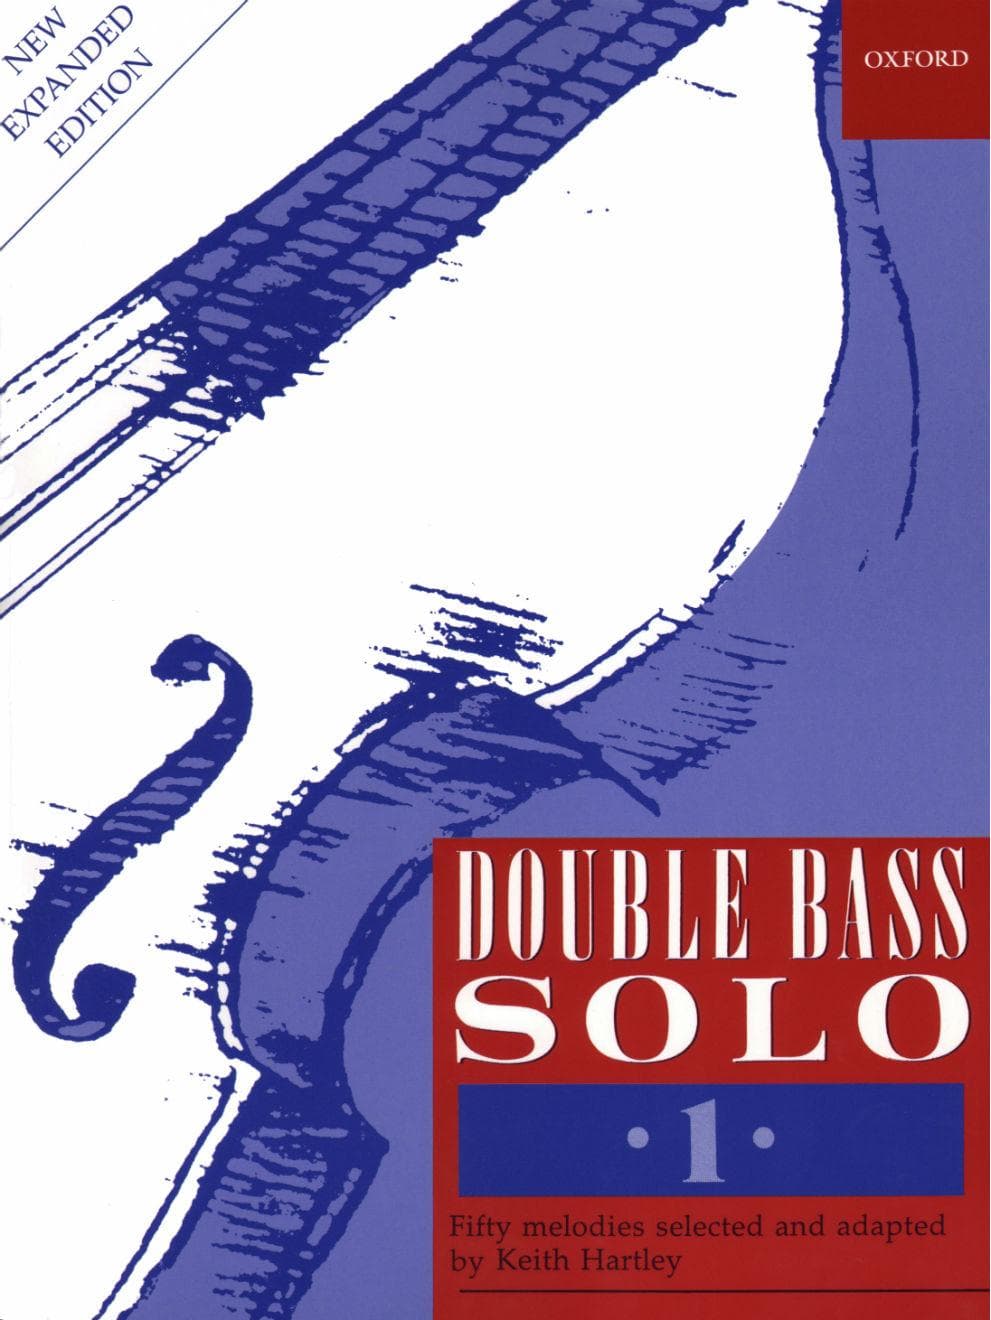 Double Bass Solo, Volume 1 (New Expanded Version) - edited by Keith Hartley - Oxford University Press